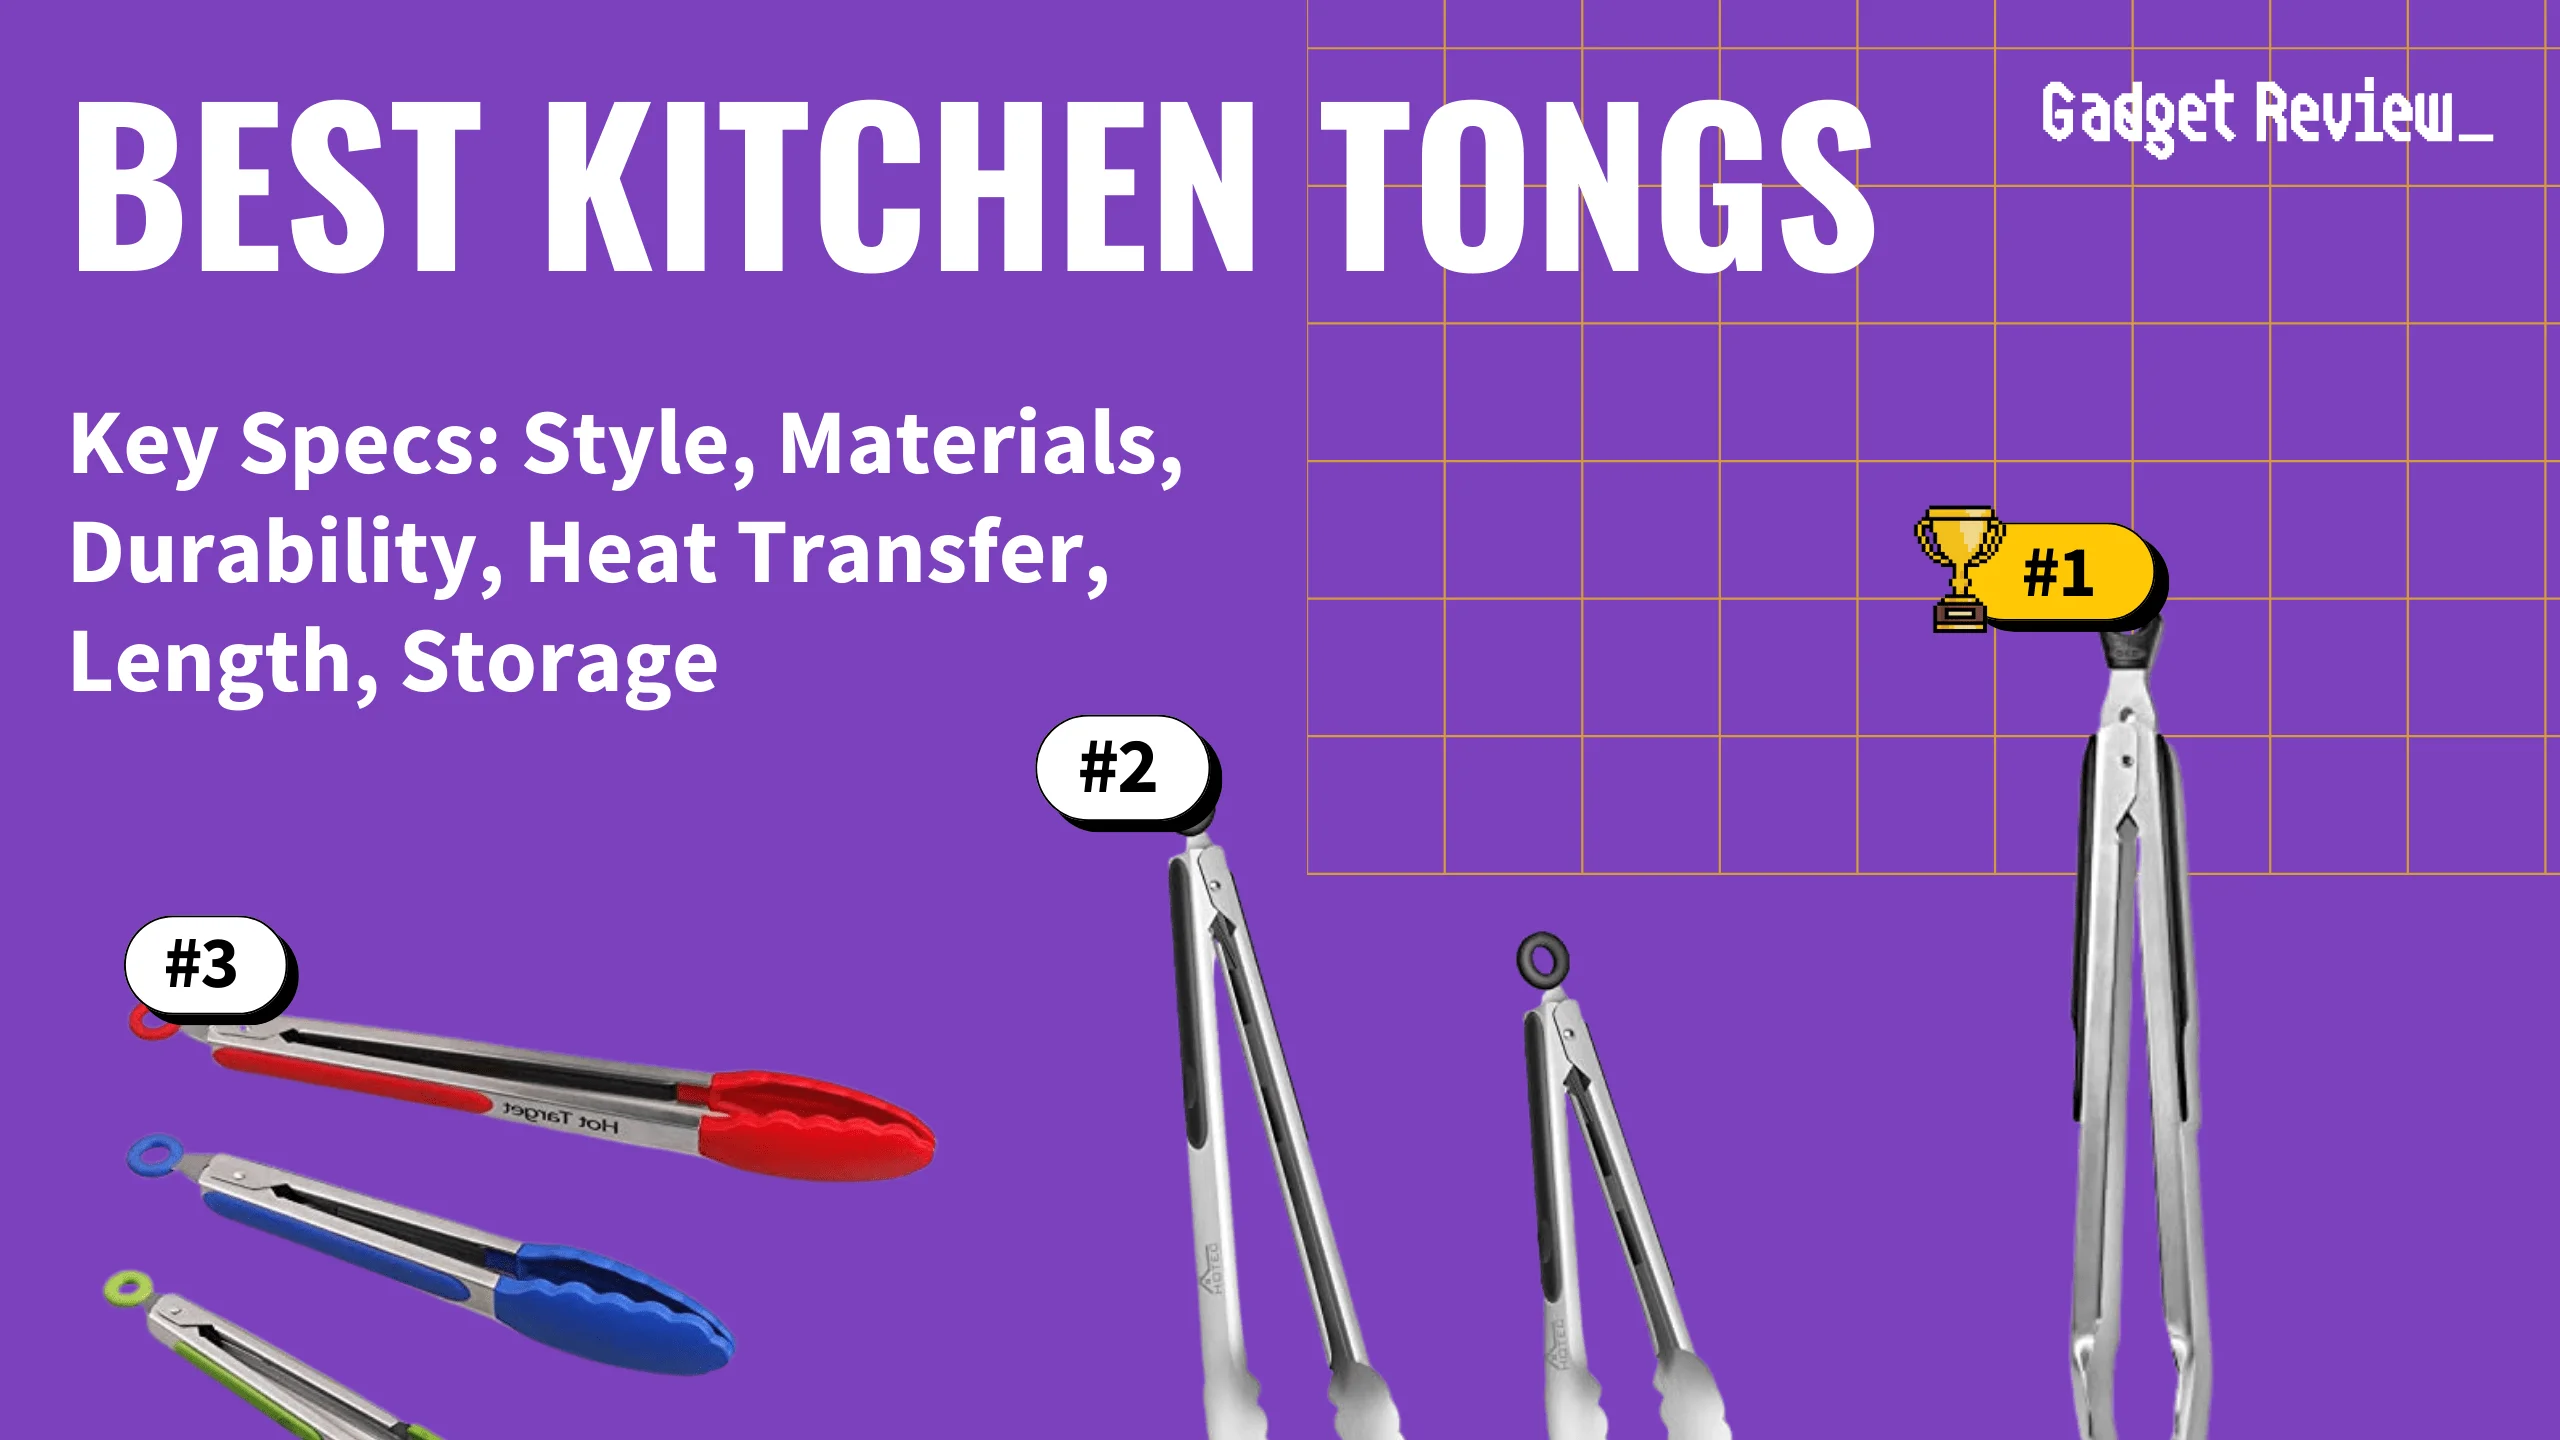 best kitchen tongs featured image that shows the top three best kitchen product models